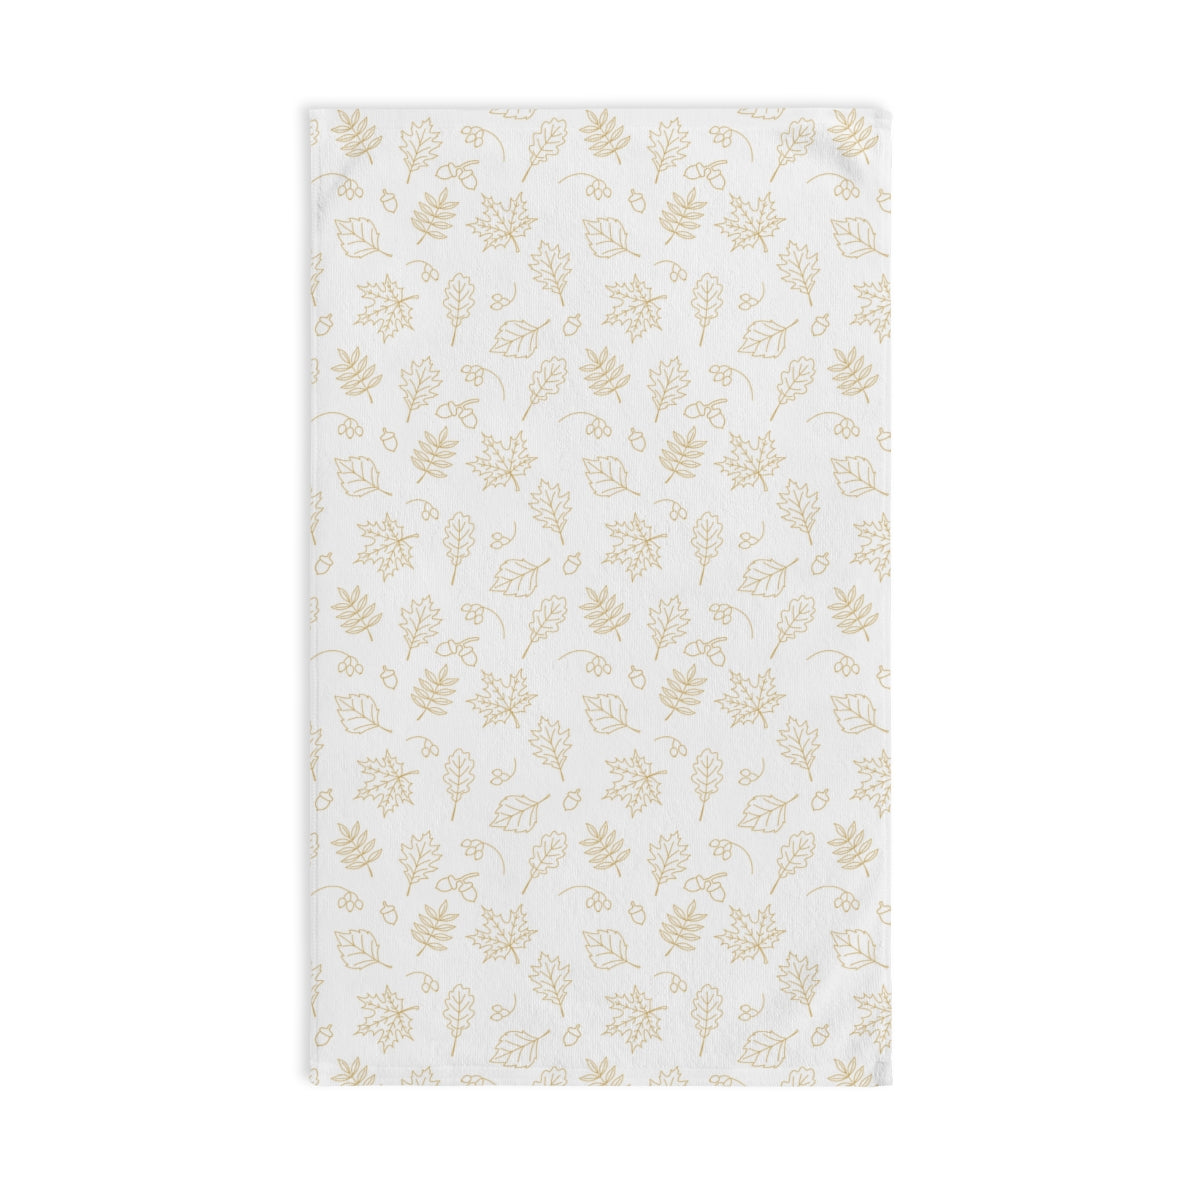 Acorns and Leaves Hand Towel